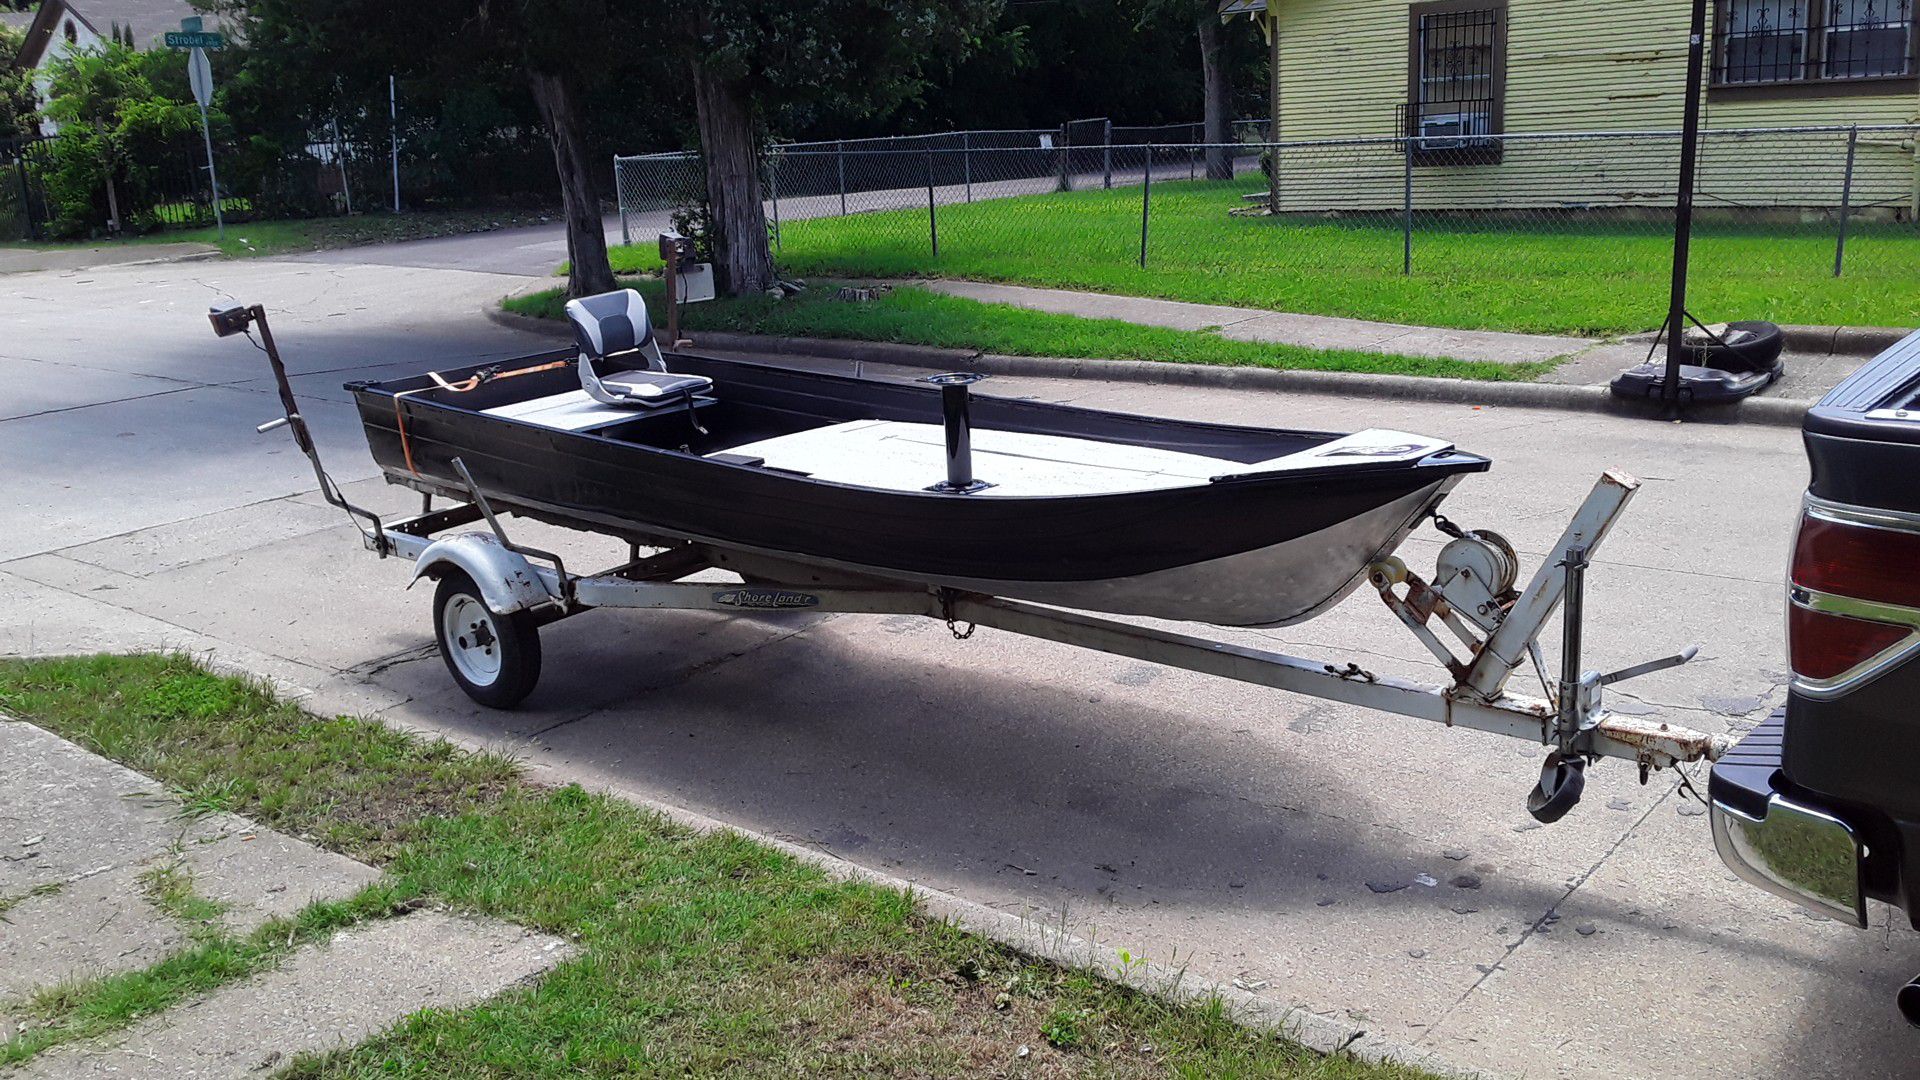 Custom made fishing boat three compartments no engine it was just built with trailer